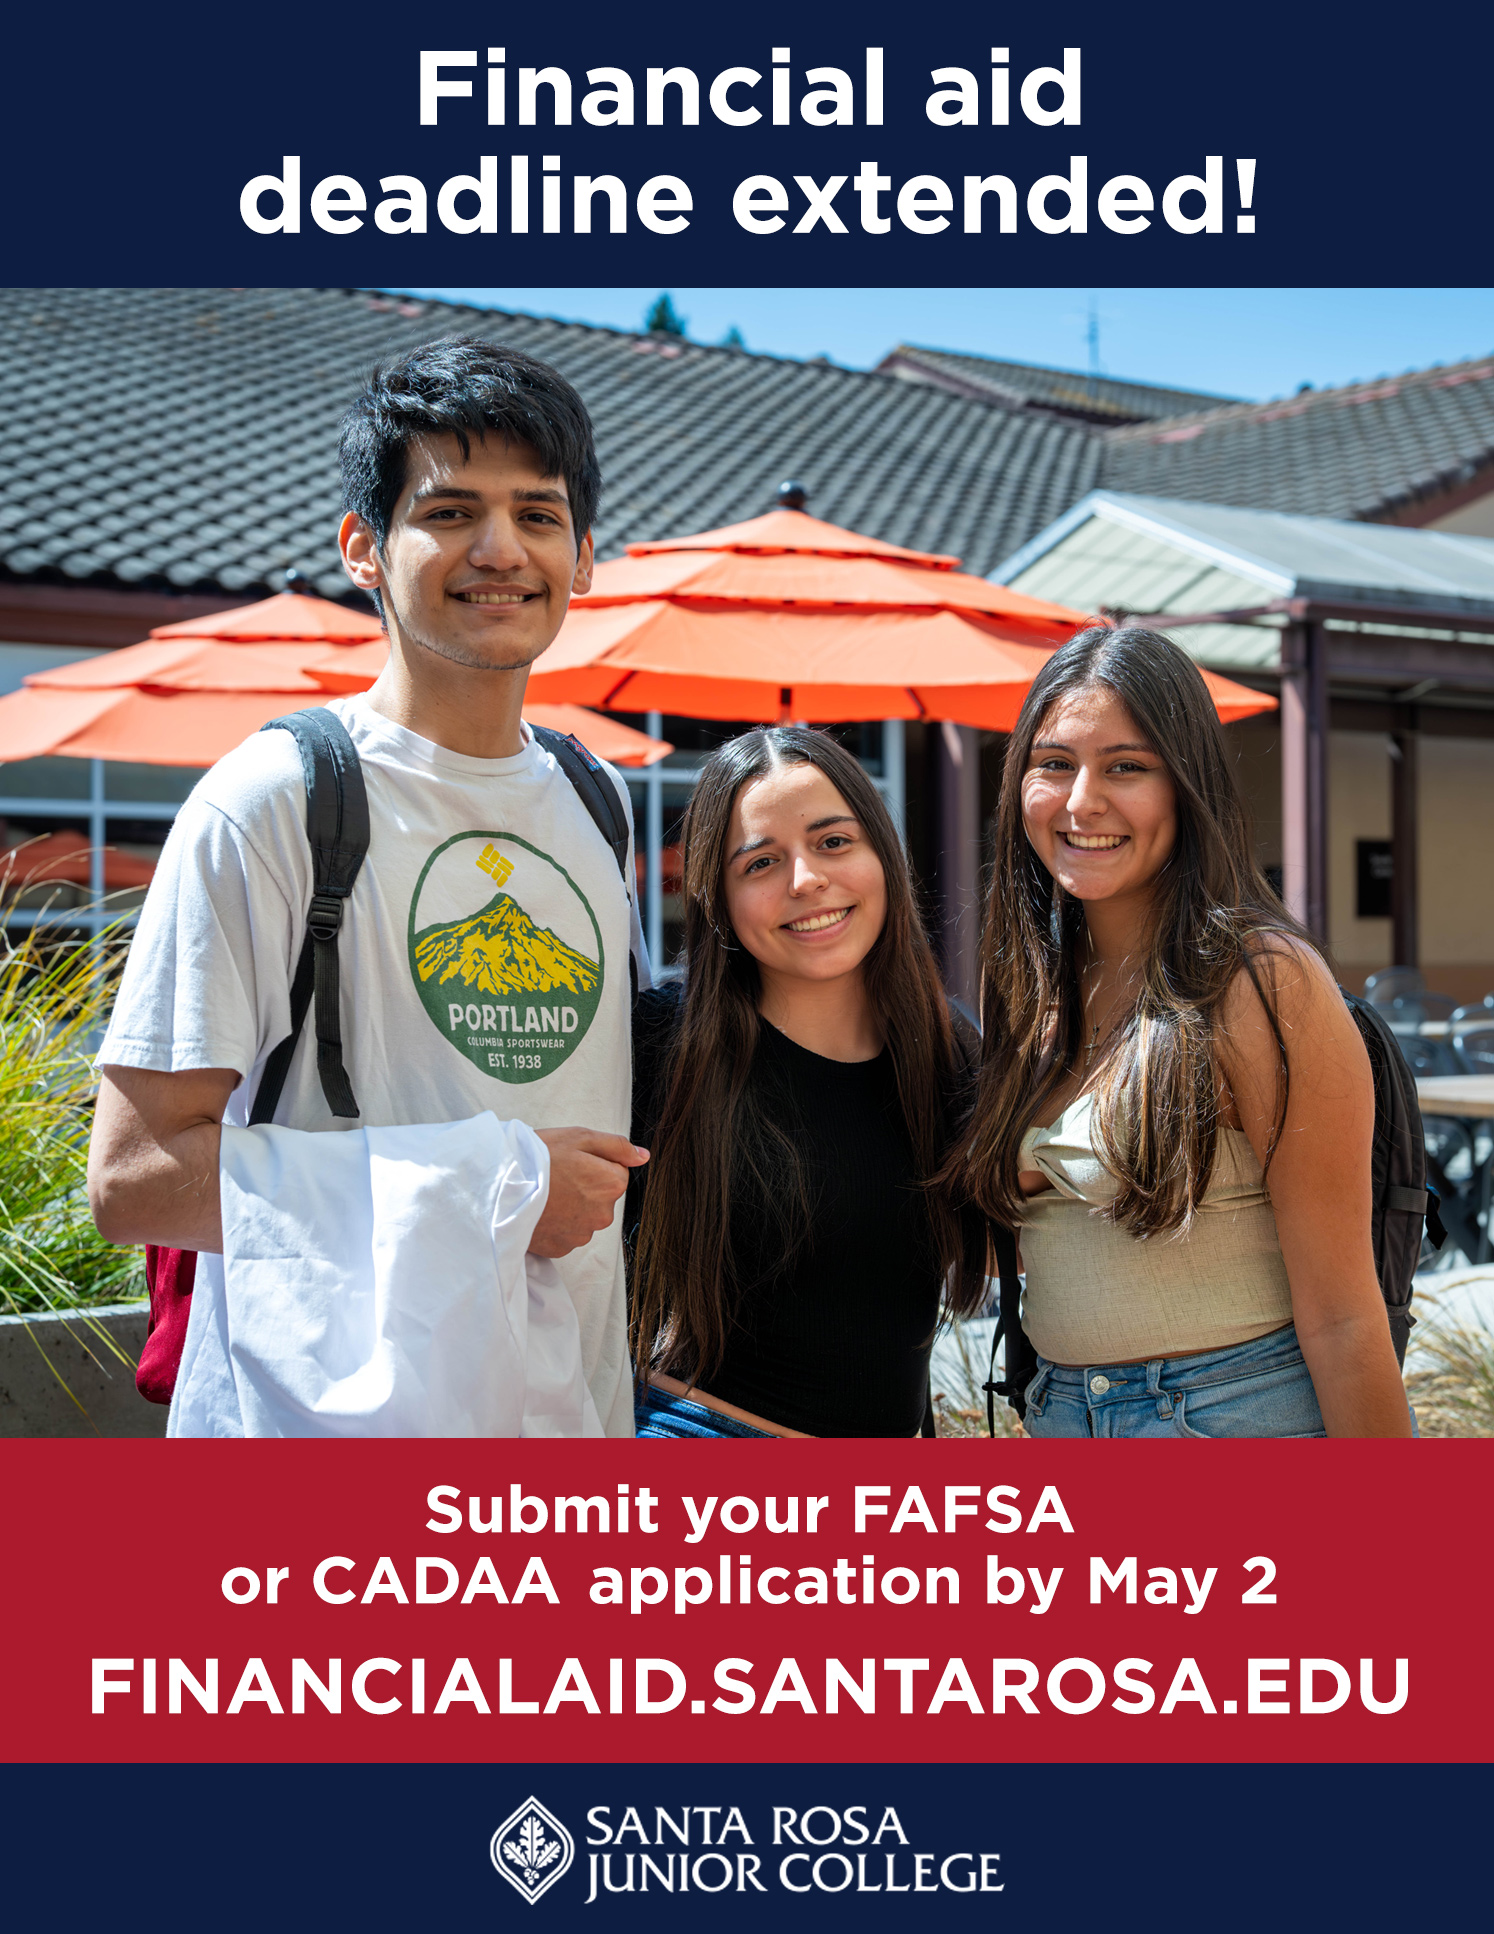 Financial aid deadline extended! Submit your FAFSA or CADAA application by May 2 financialaid.santarosa.edu